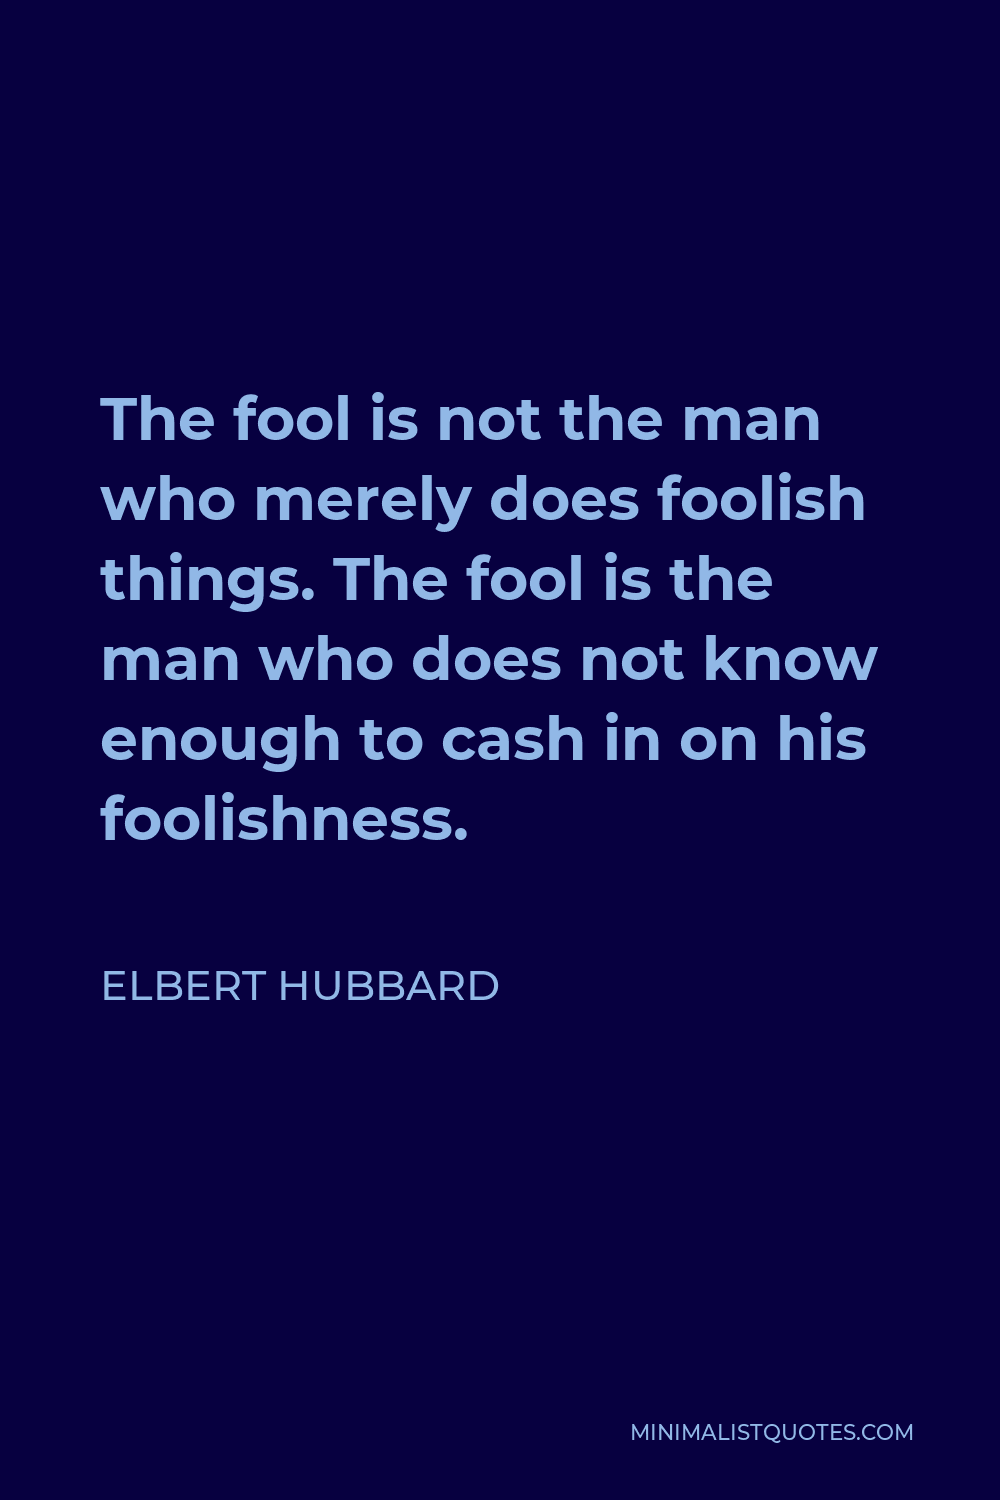 Elbert Hubbard Quote - The fool is not the man who merely does foolish things. The fool is the man who does not know enough to cash in on his foolishness.